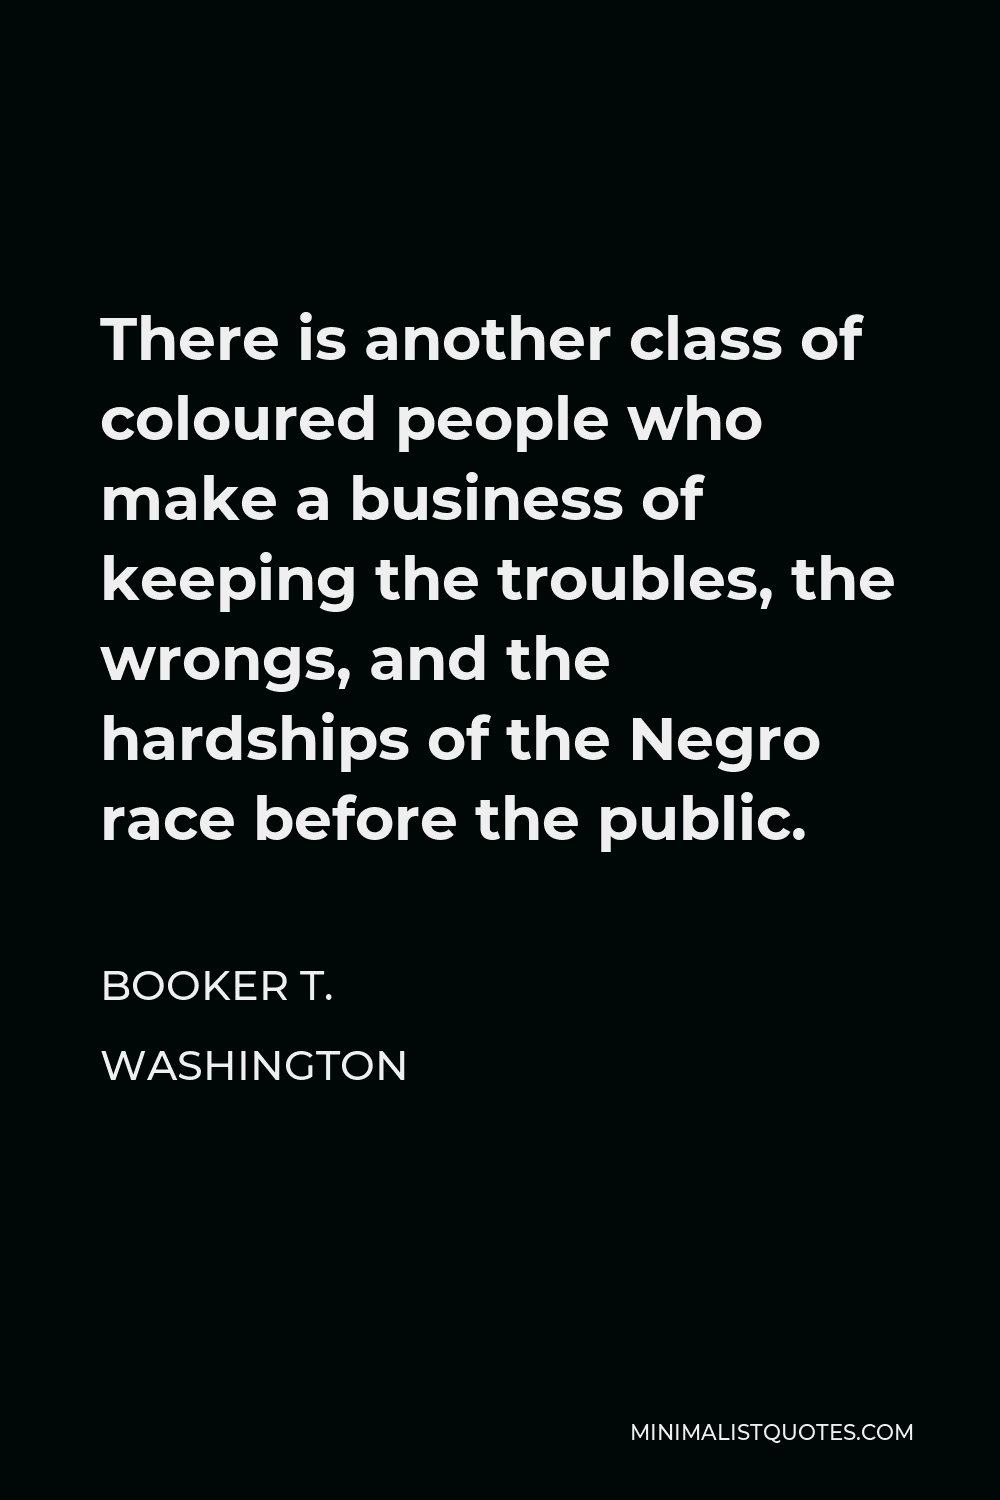 Booker T. Washington Quote - There is another class of coloured people who make a business of keeping the troubles, the wrongs, and the hardships of the Negro race before the public.